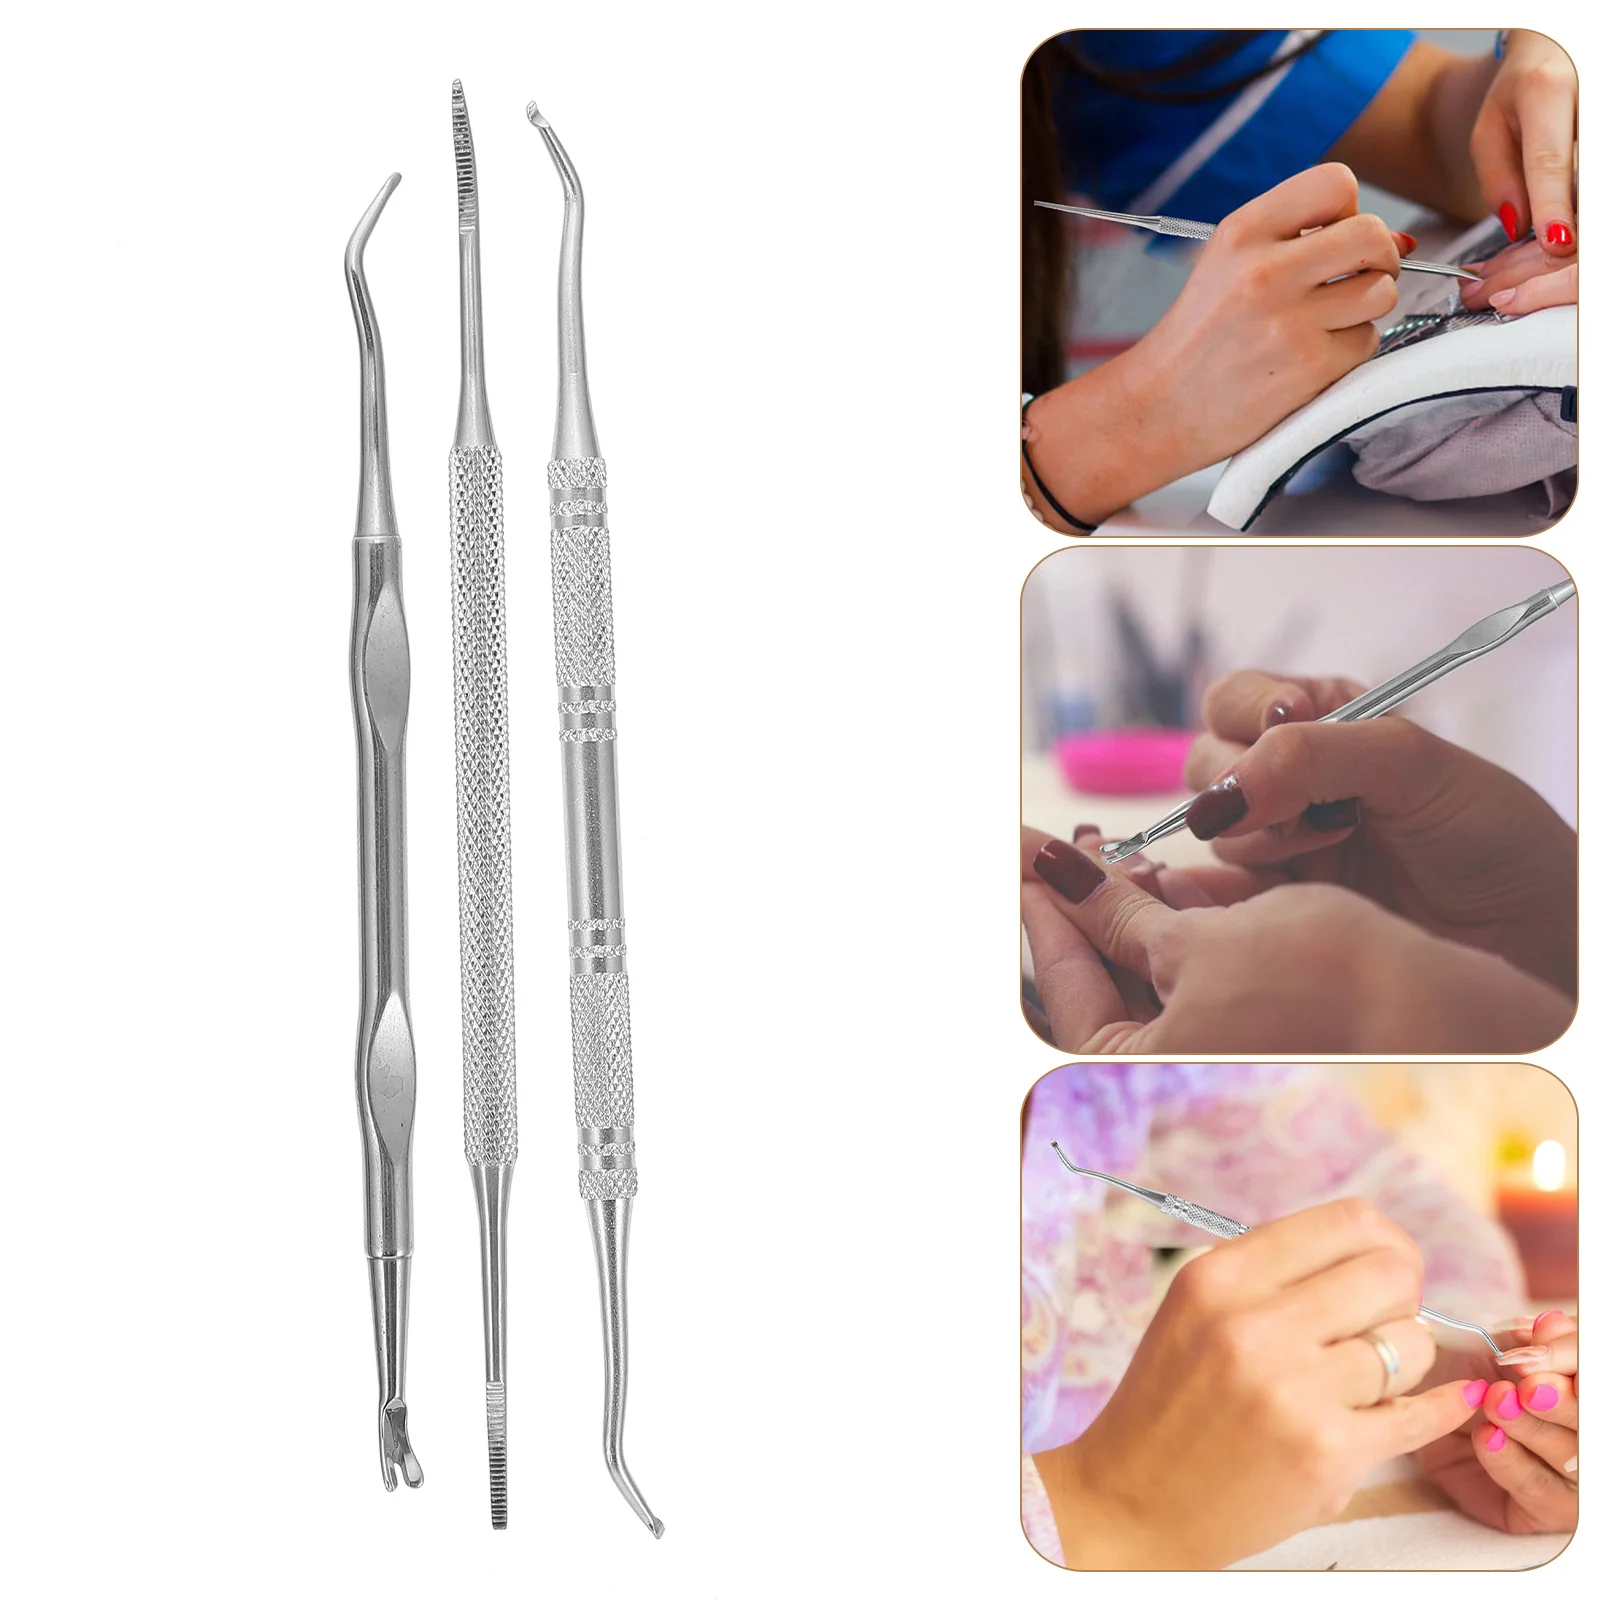 3 Pcs Nail Remover Practical Toenail File Kit Pedicure Tool Ingrown Double-end Cleaner Professional Lifter Dedicated Cleaning free shipping new kites flying butterfly kites for kids kites professional wind kites marrov tracks lifter kite rubber snake